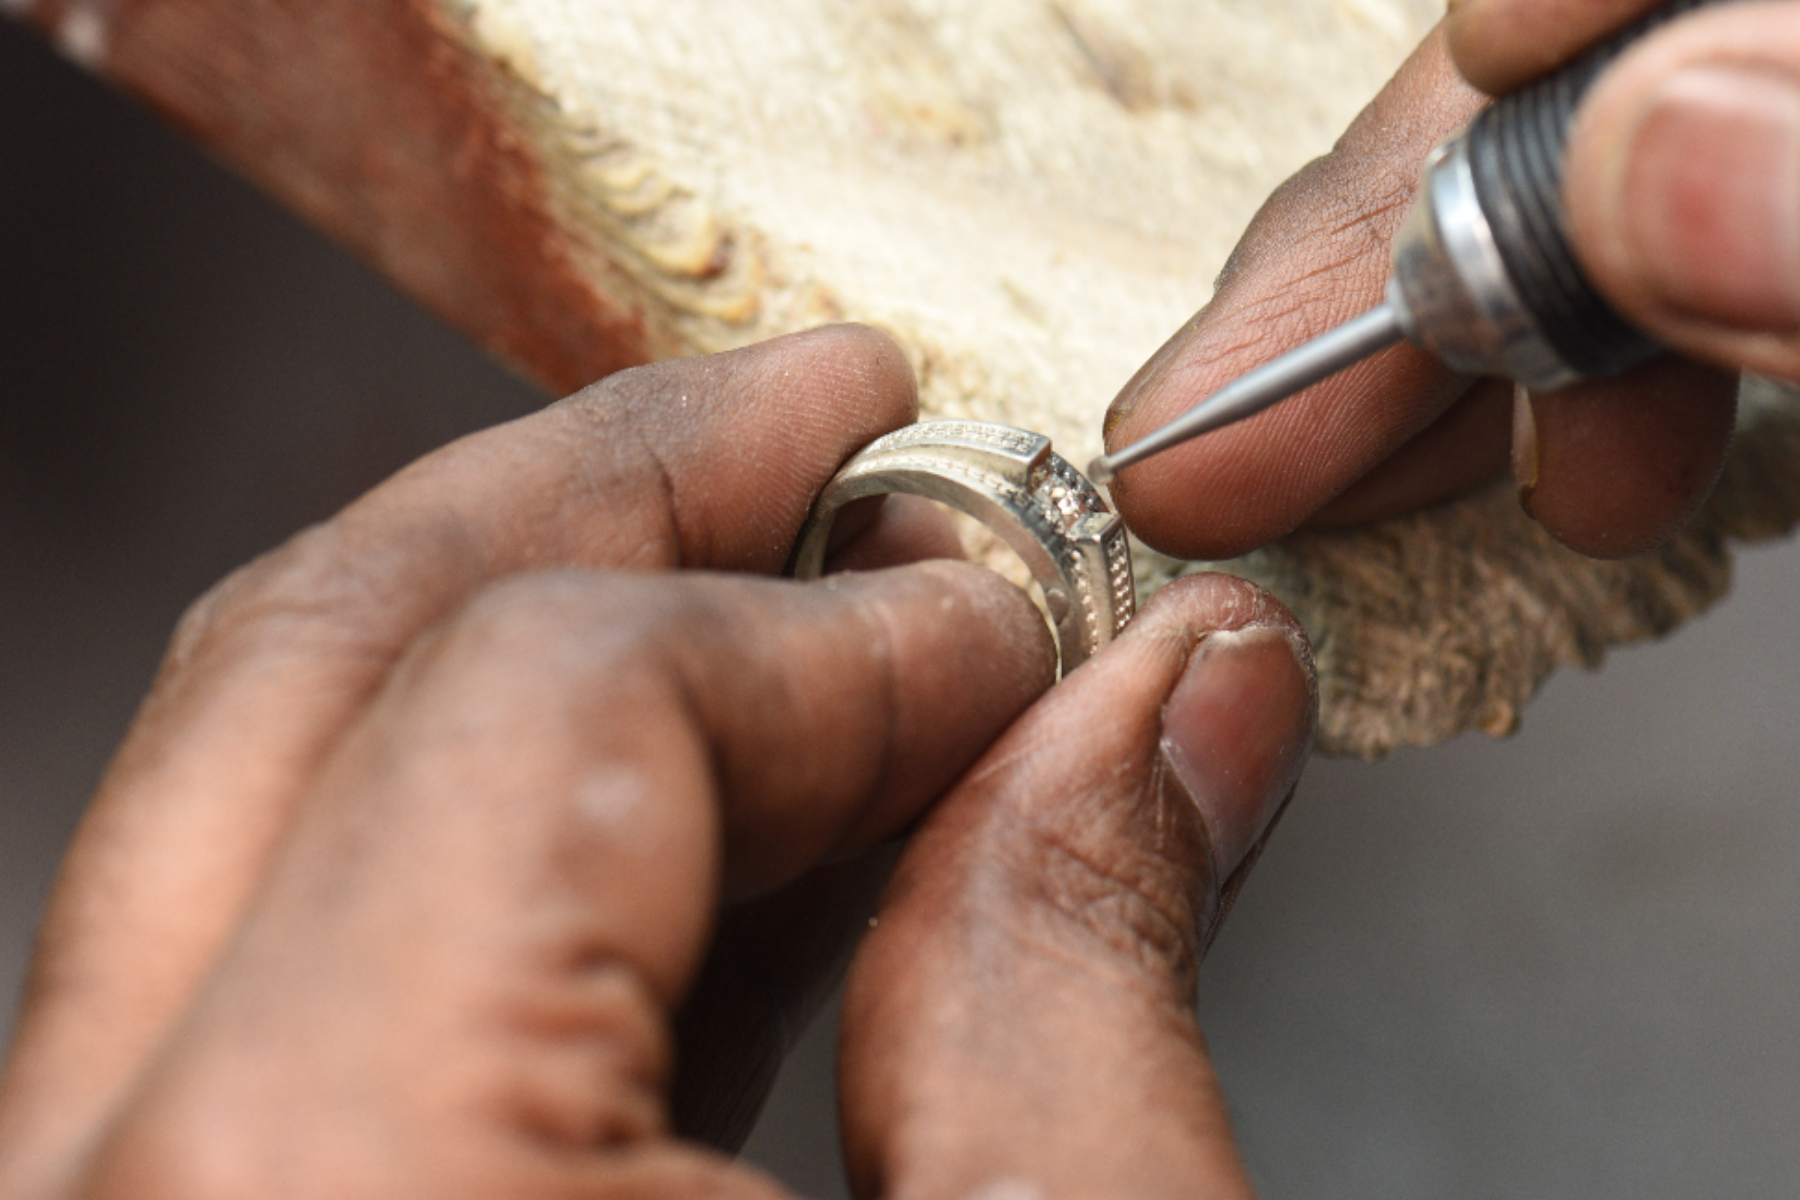 A person's hand at work on a wedding ring